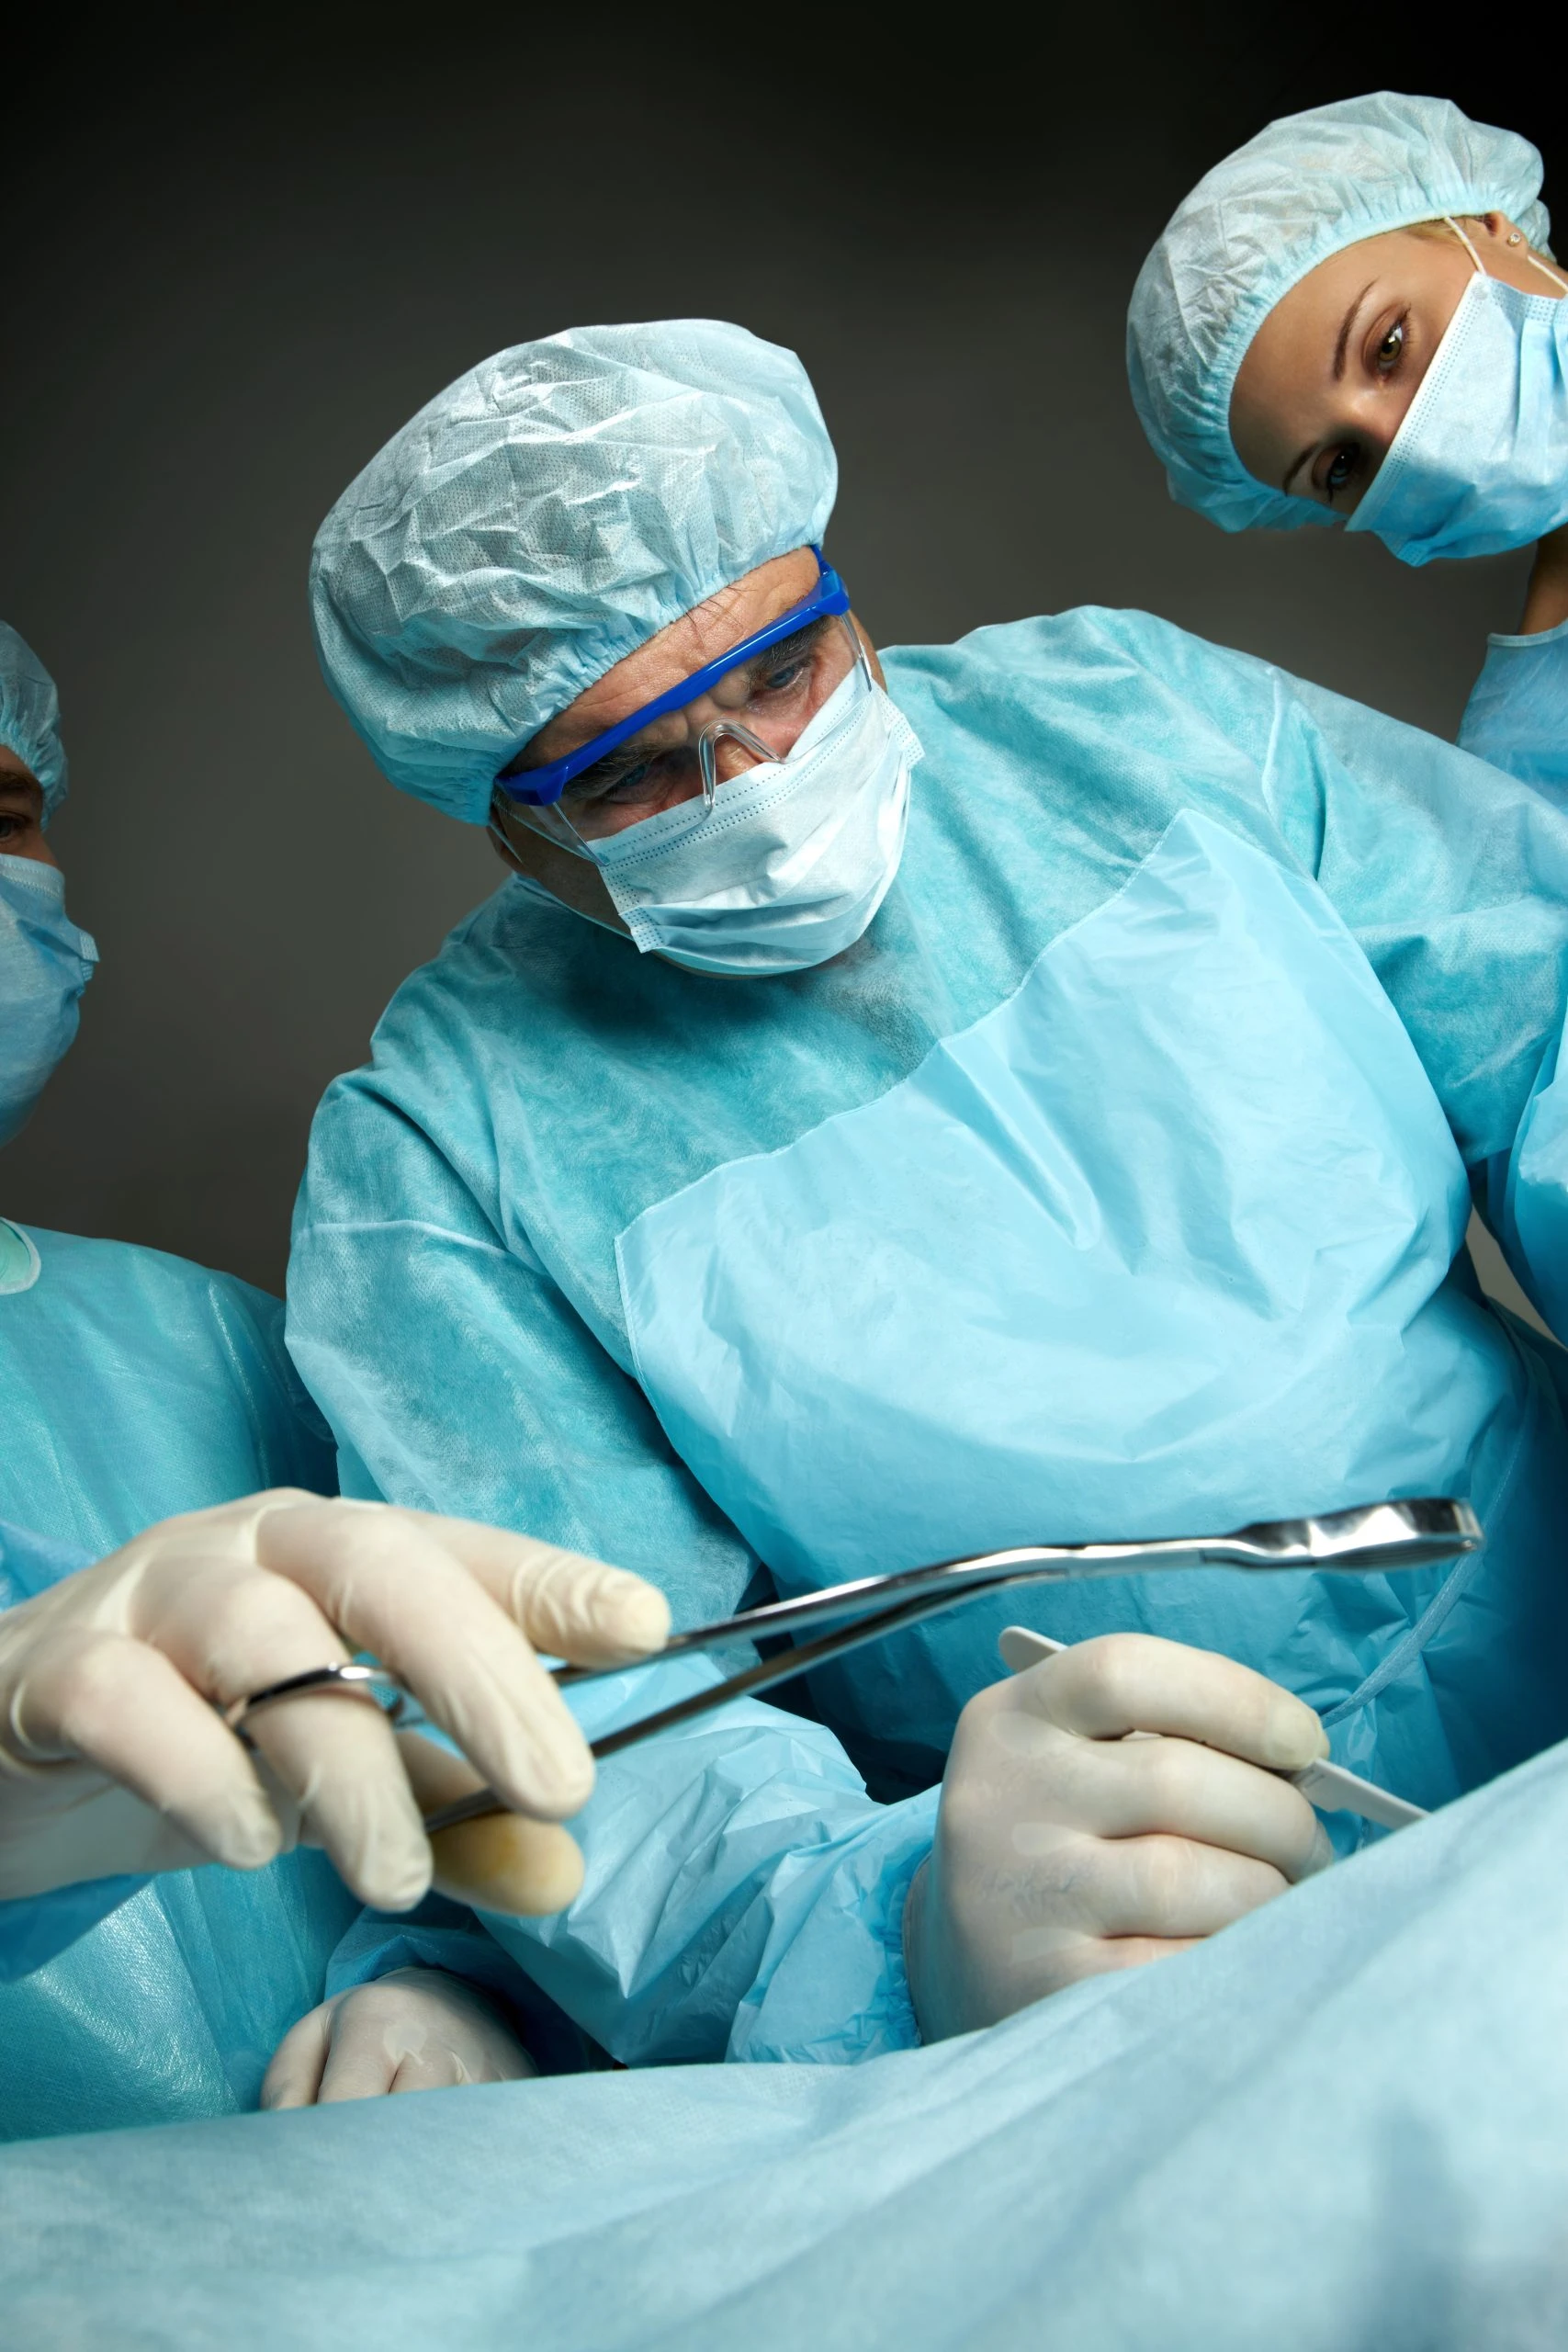 side view of three surgeons operating scaled